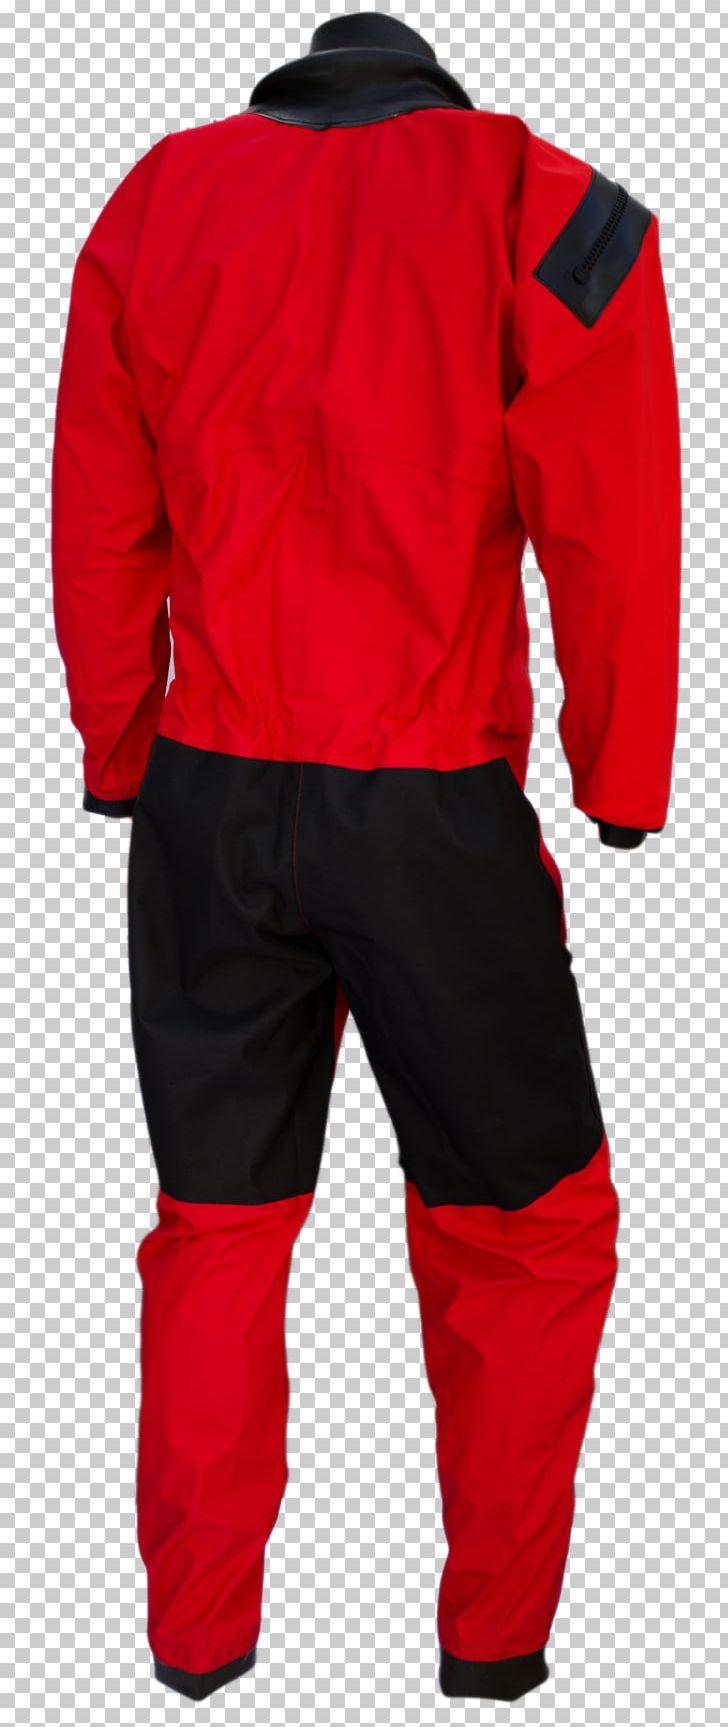 Dry Suit Dry Fashion Sportswear GmbH Jacket Outerwear PNG, Clipart, Amazoncom, Dry Fashion Sportswear Gmbh, Dry Suit, Hood, Jacket Free PNG Download